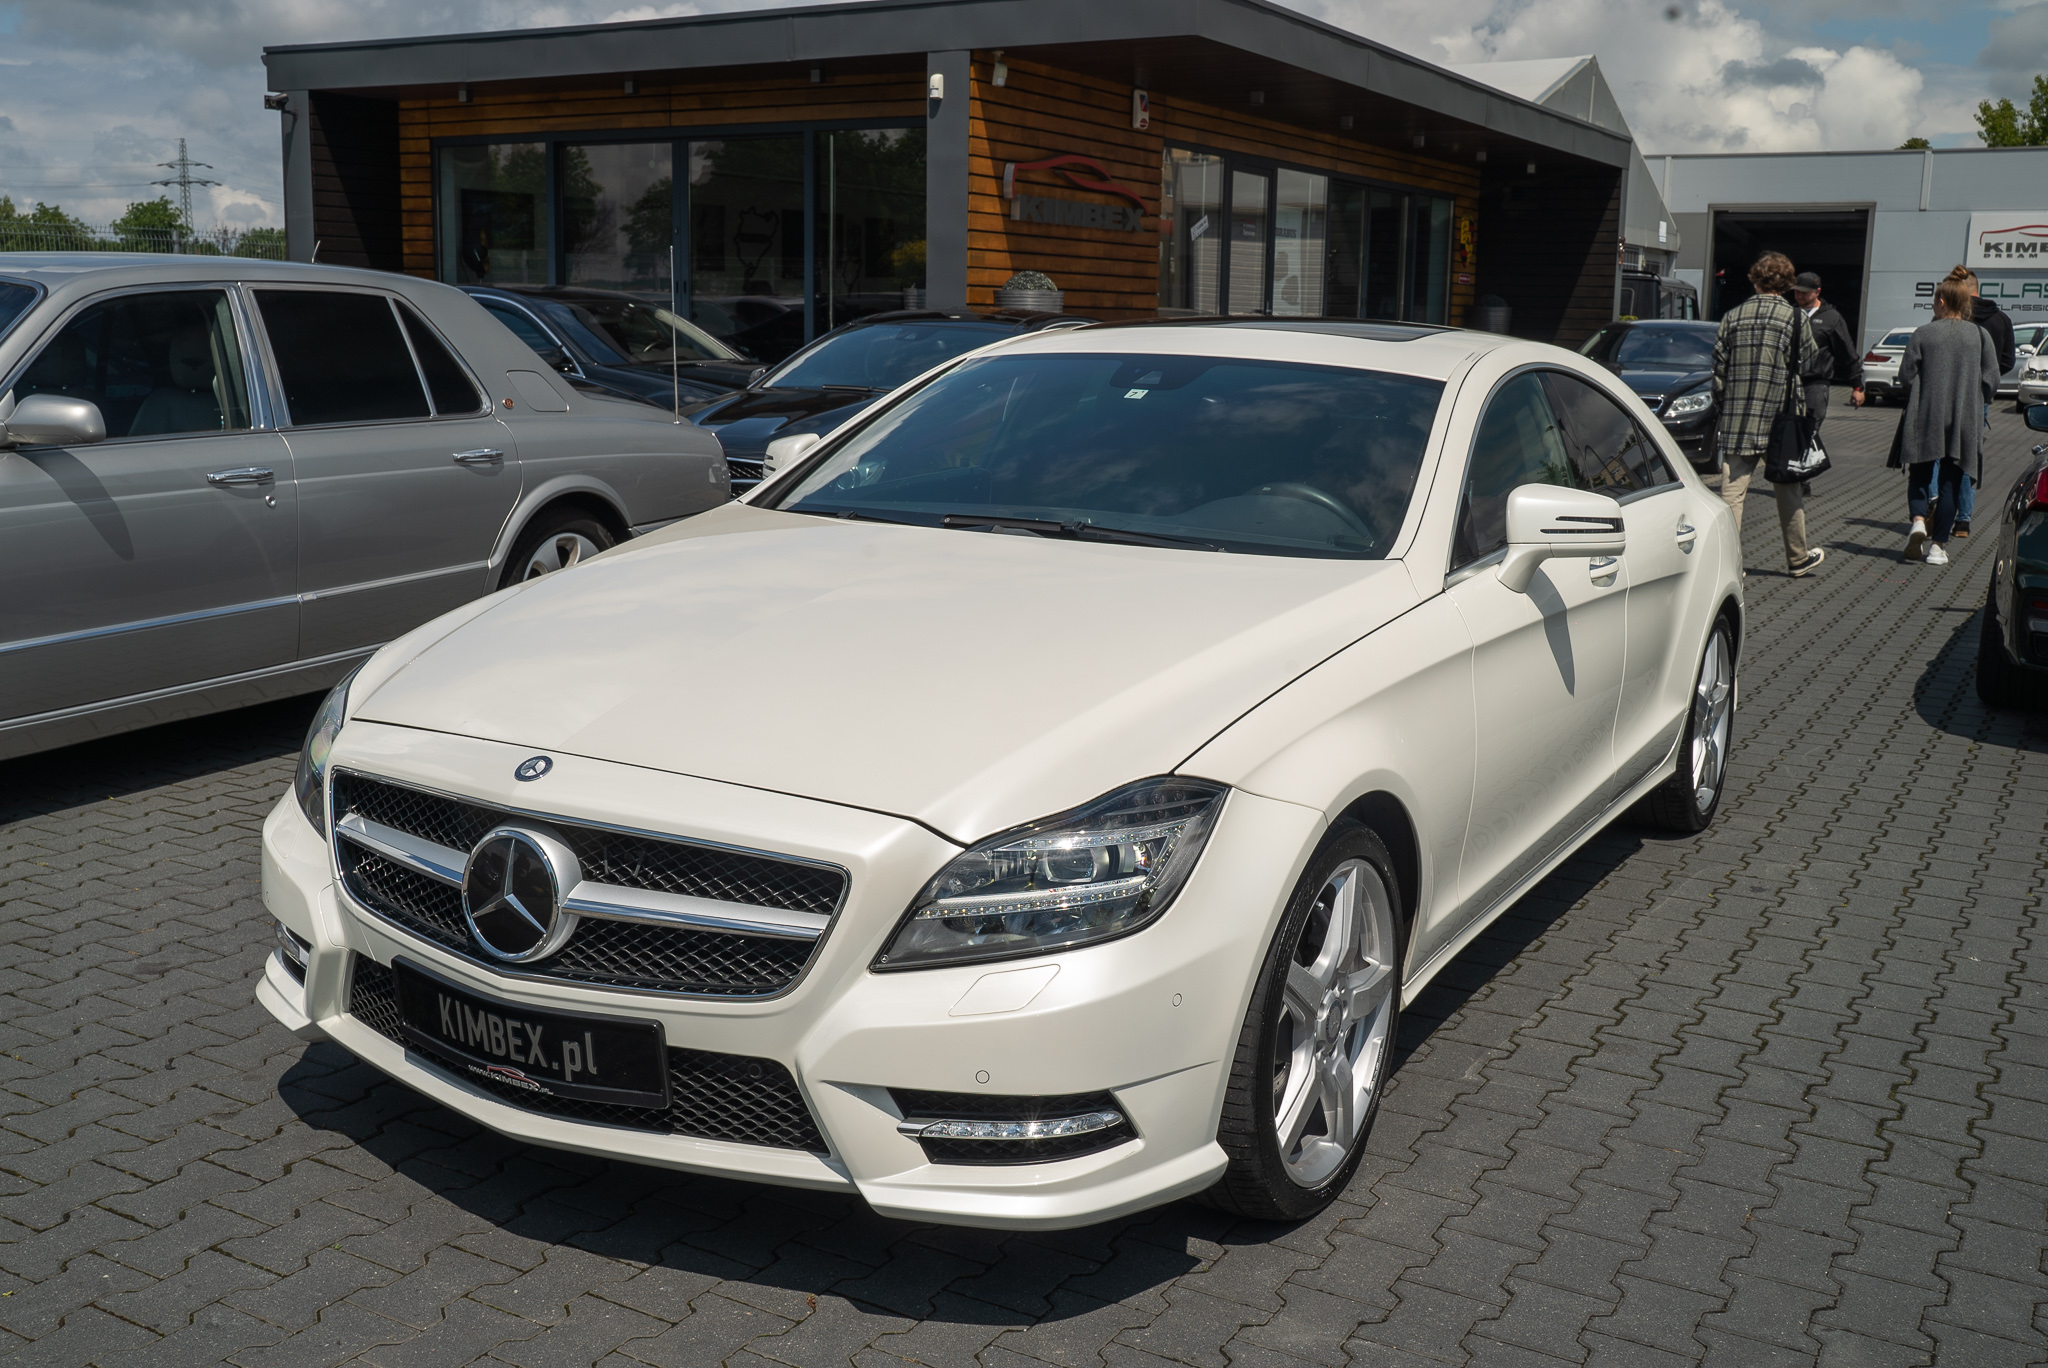 Mercedes Benz CLS 500 AMG '2013 only 27800 km LIKE NEW Kimbex Dream